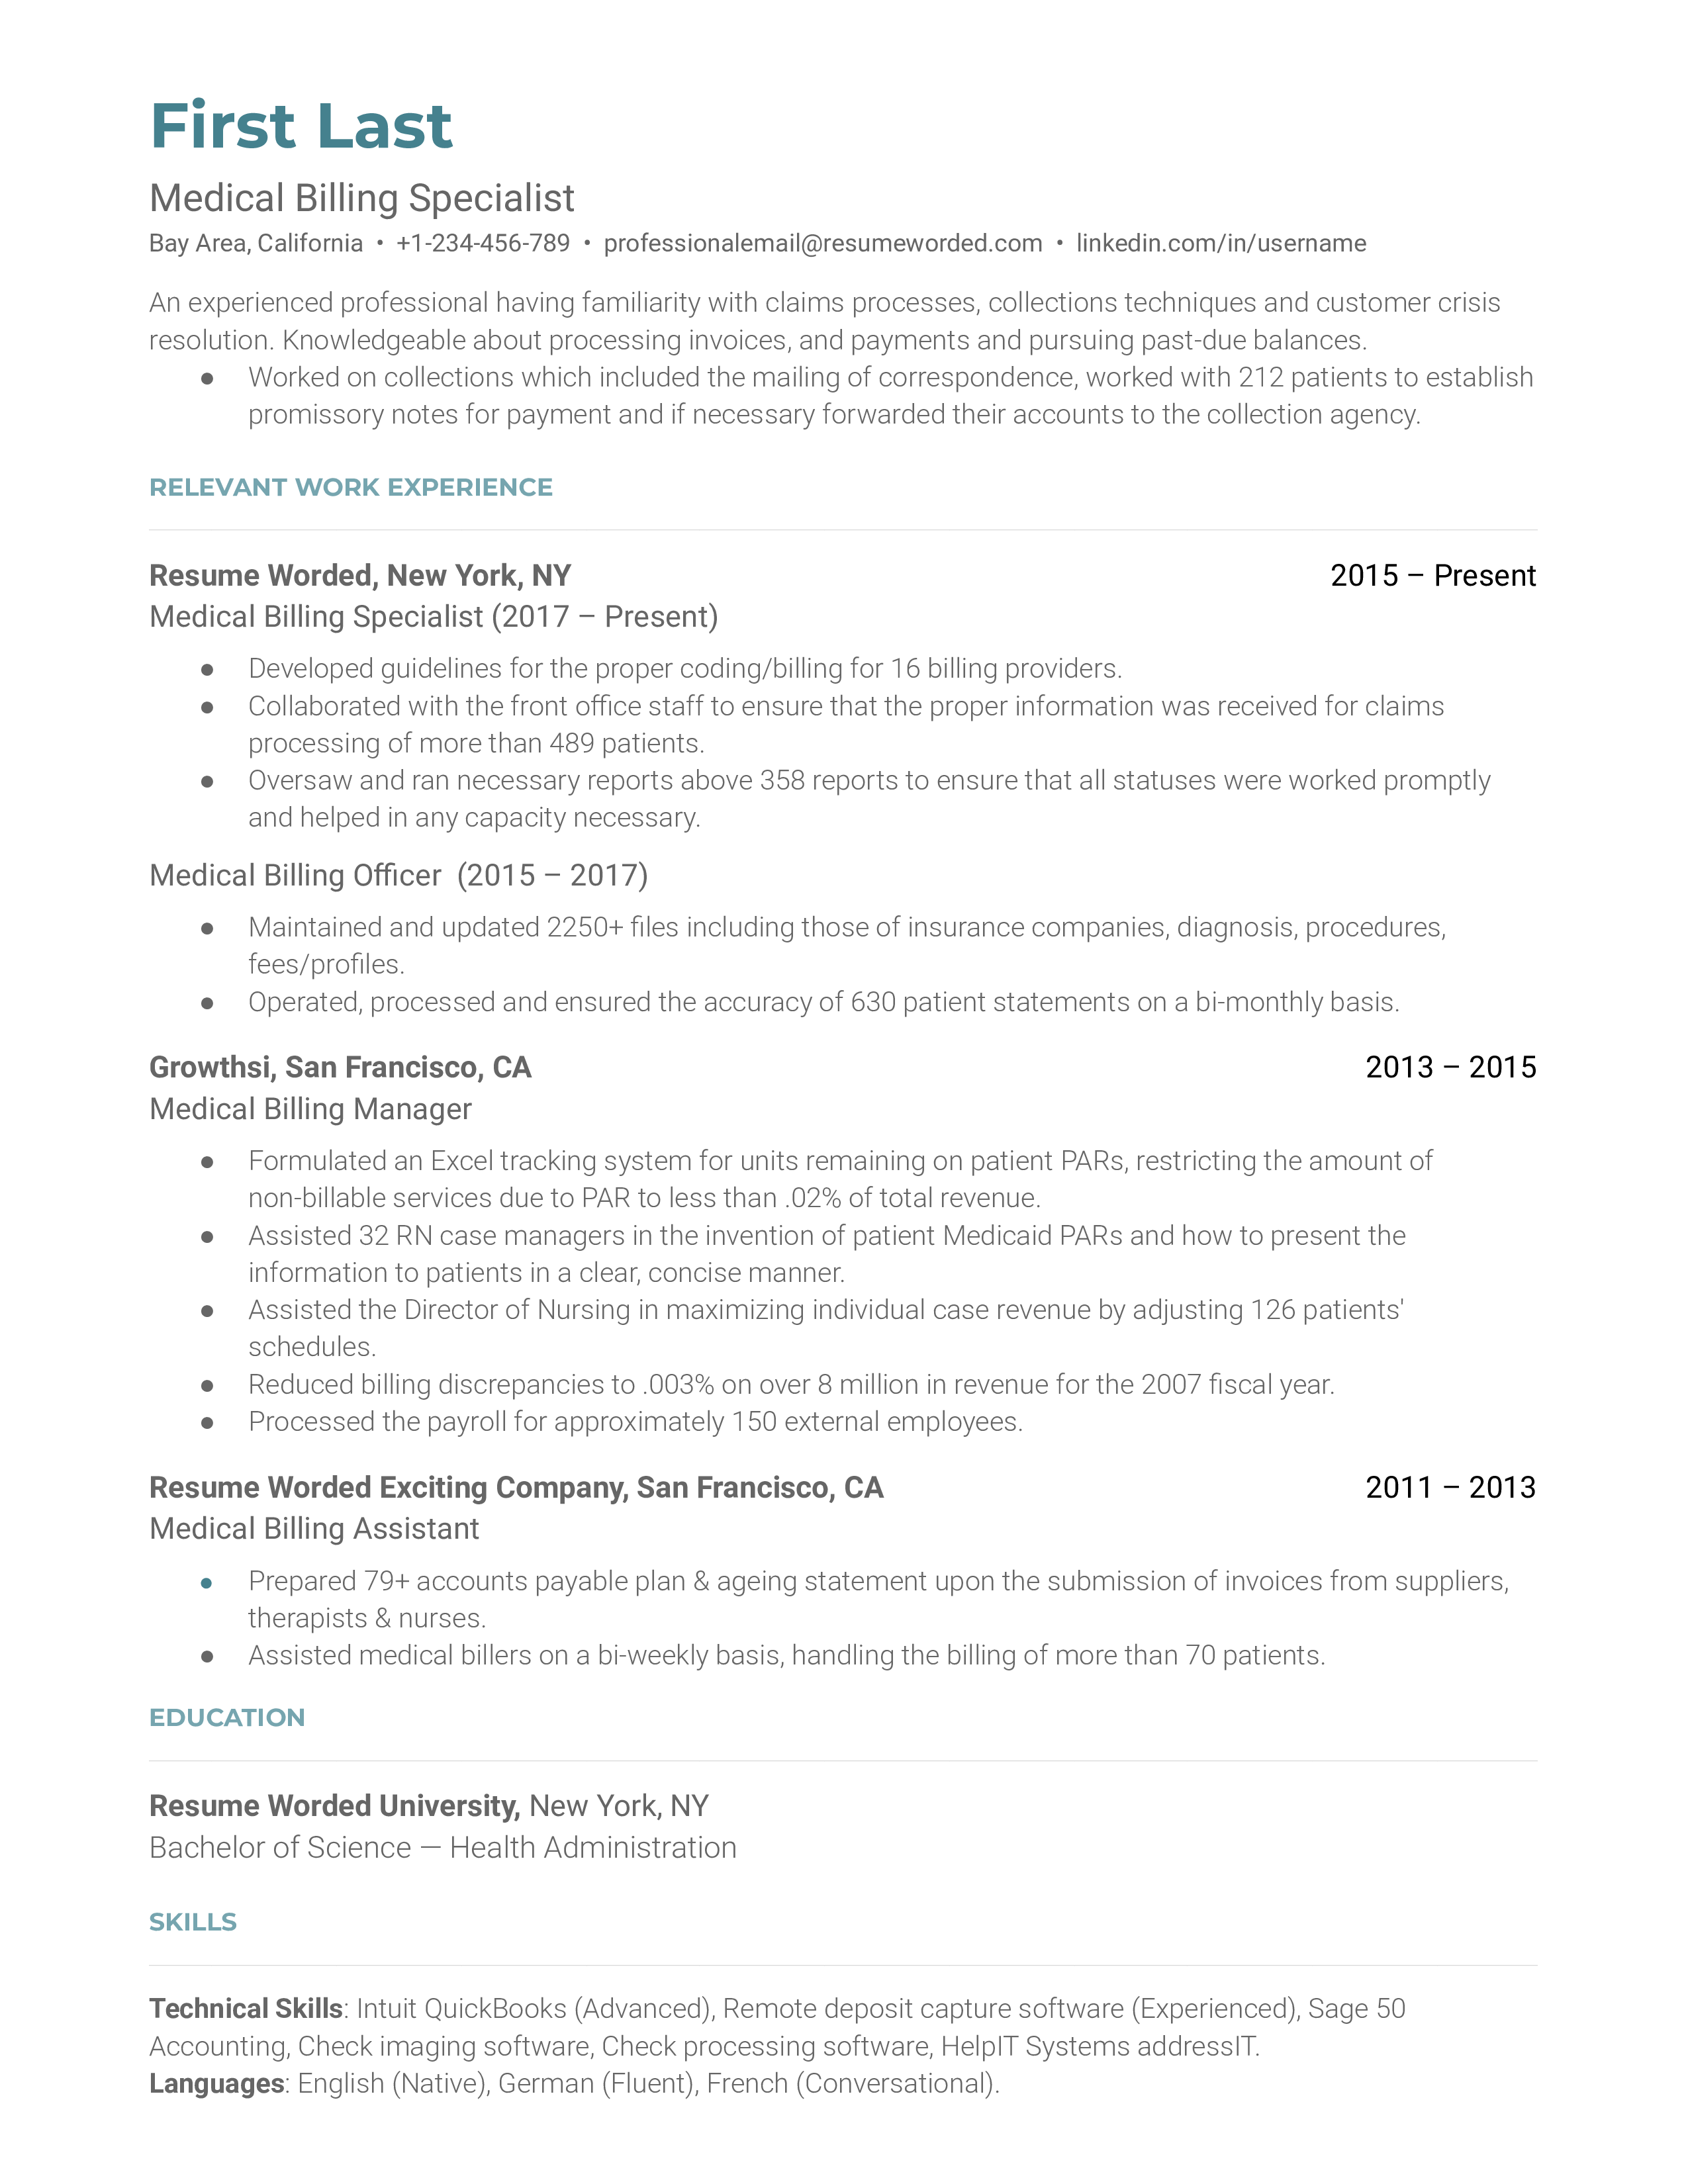 A medical billing specialist resume template showing experience in claims processing, customer crisis resolution, and collection techniques